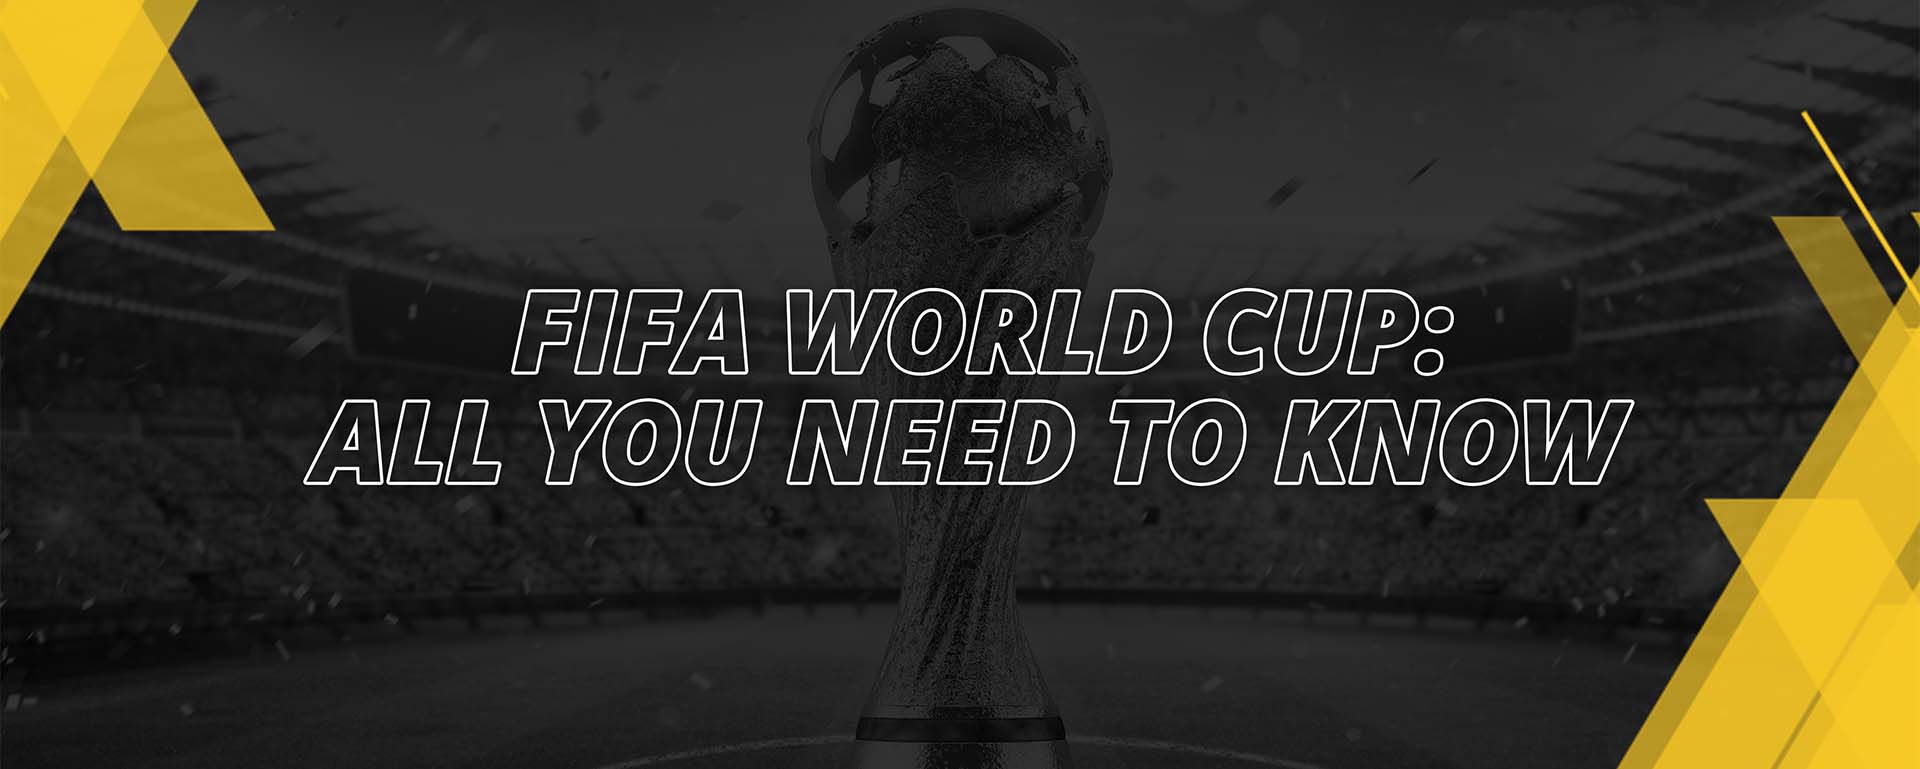 WORLD CUP 2022: EVERYTHING YOU NEED TO KNOW